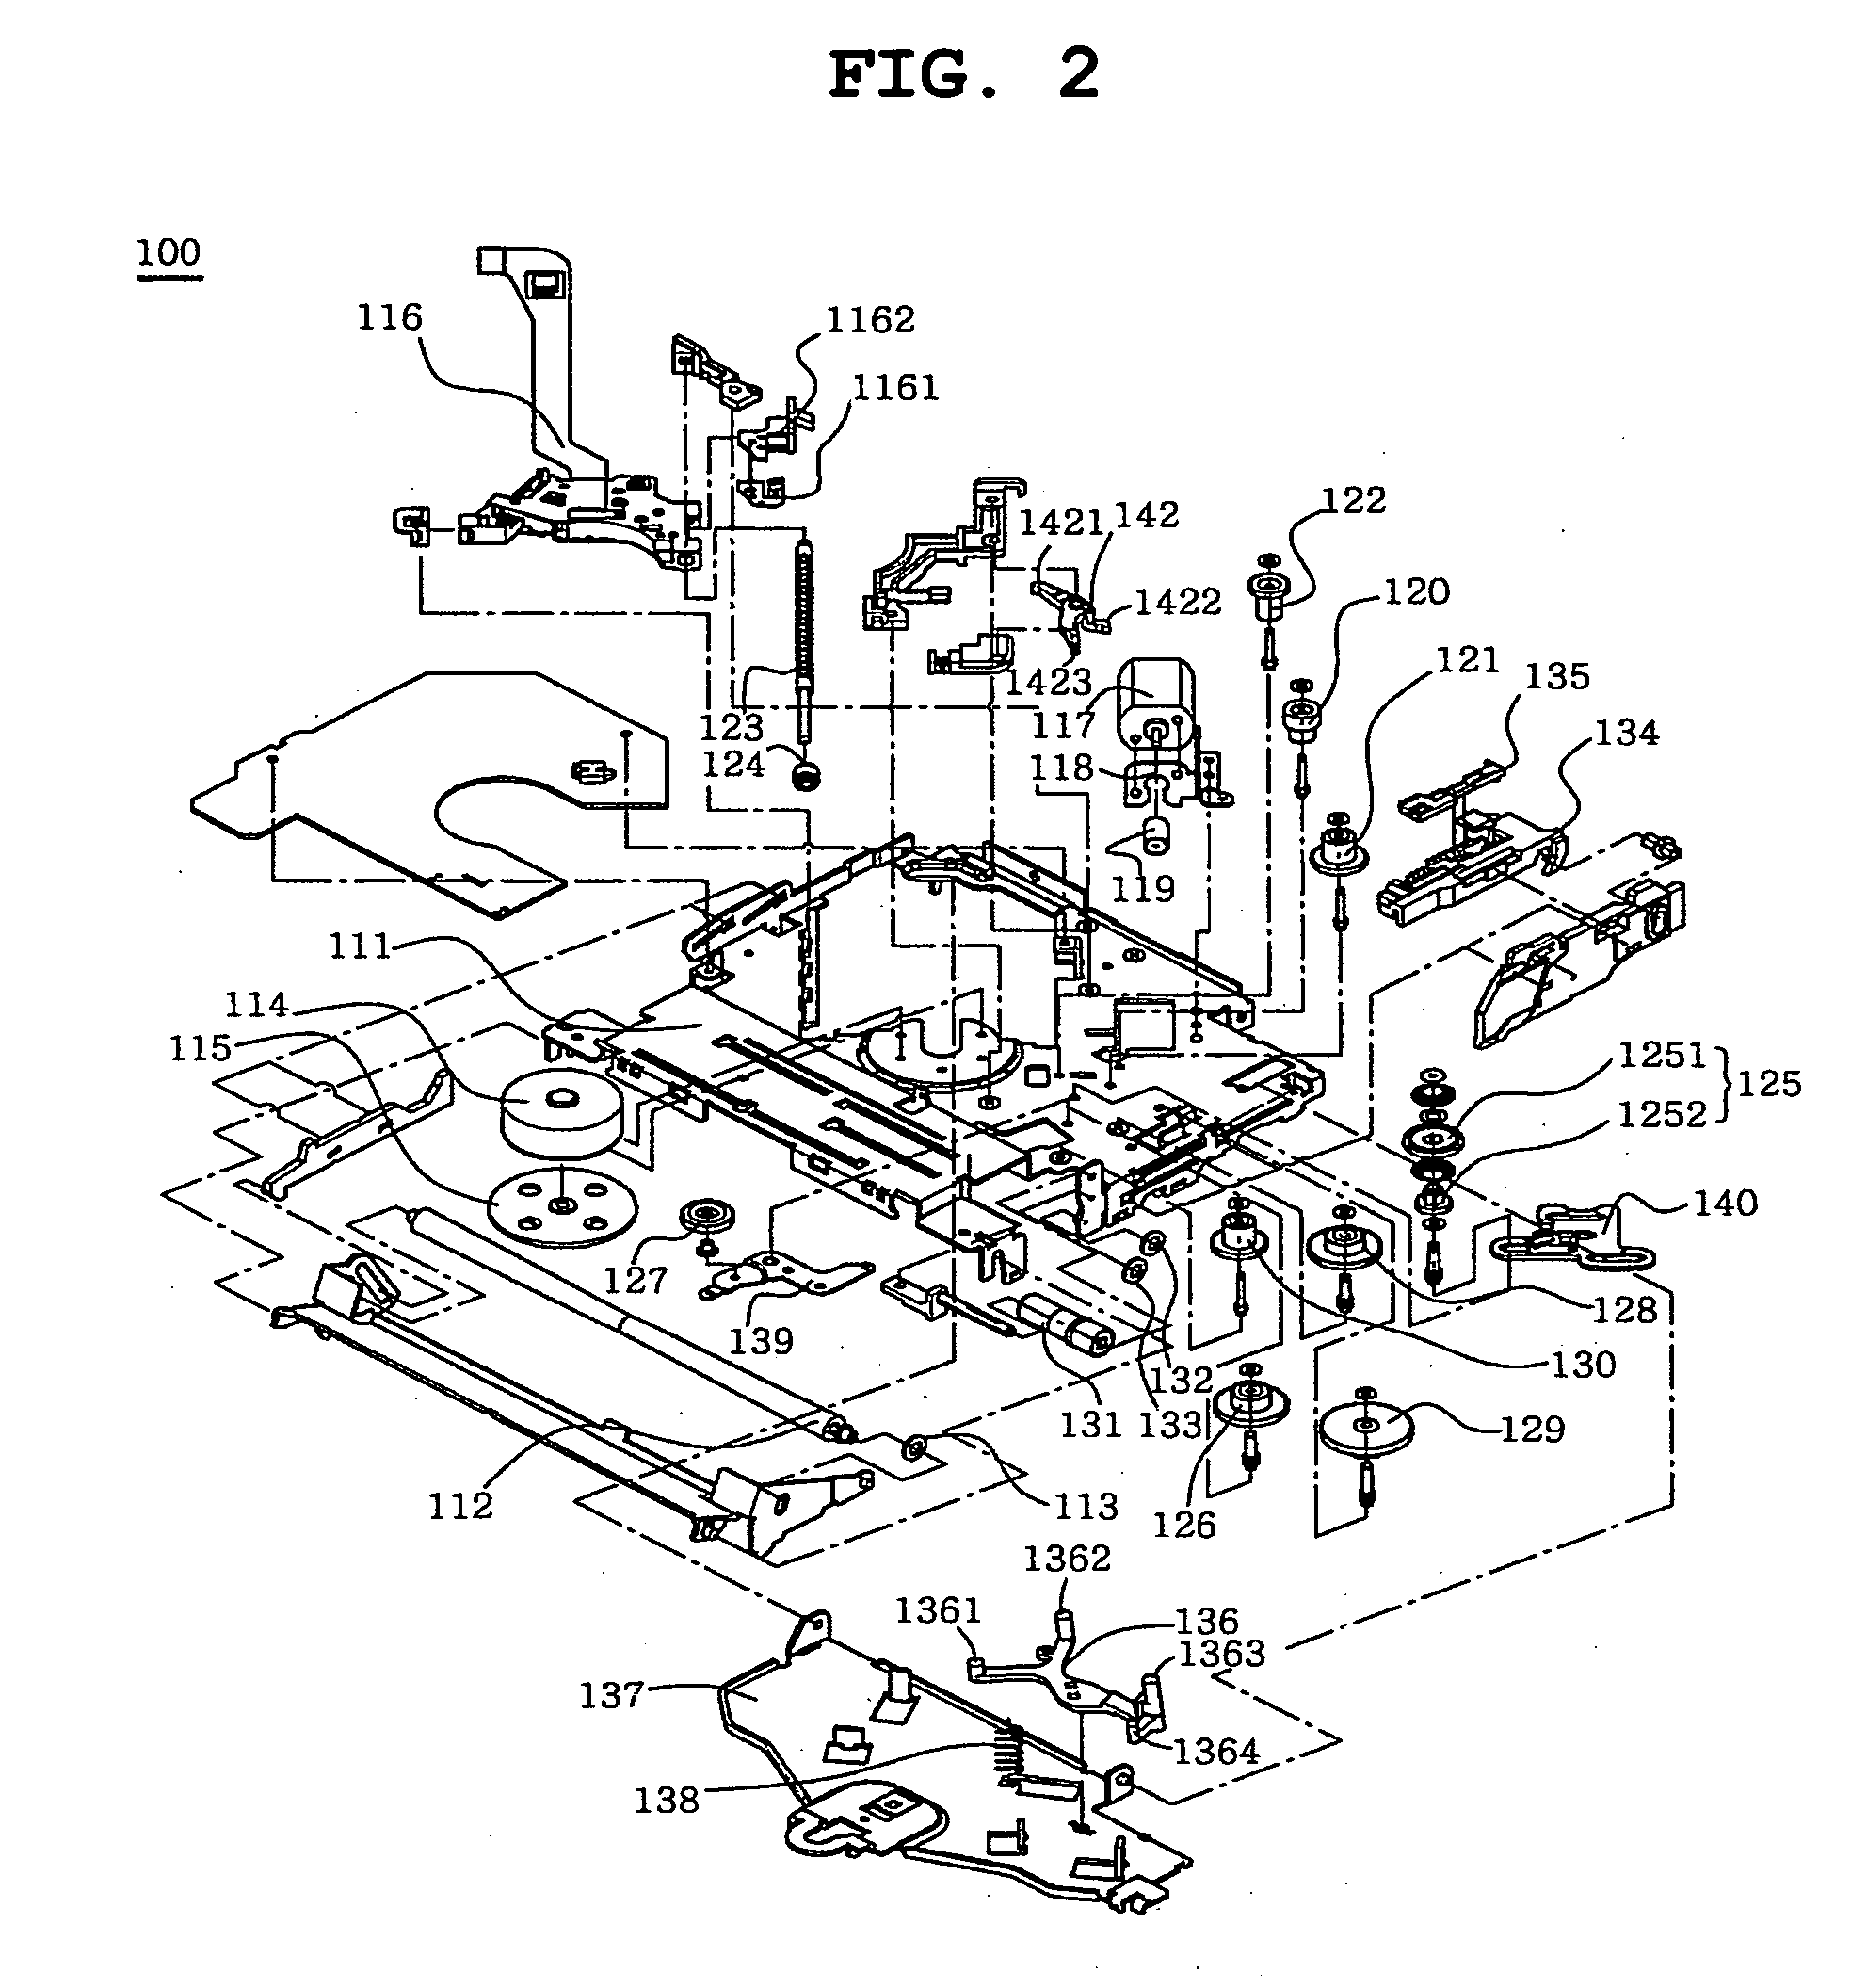 Disk player for vehicles